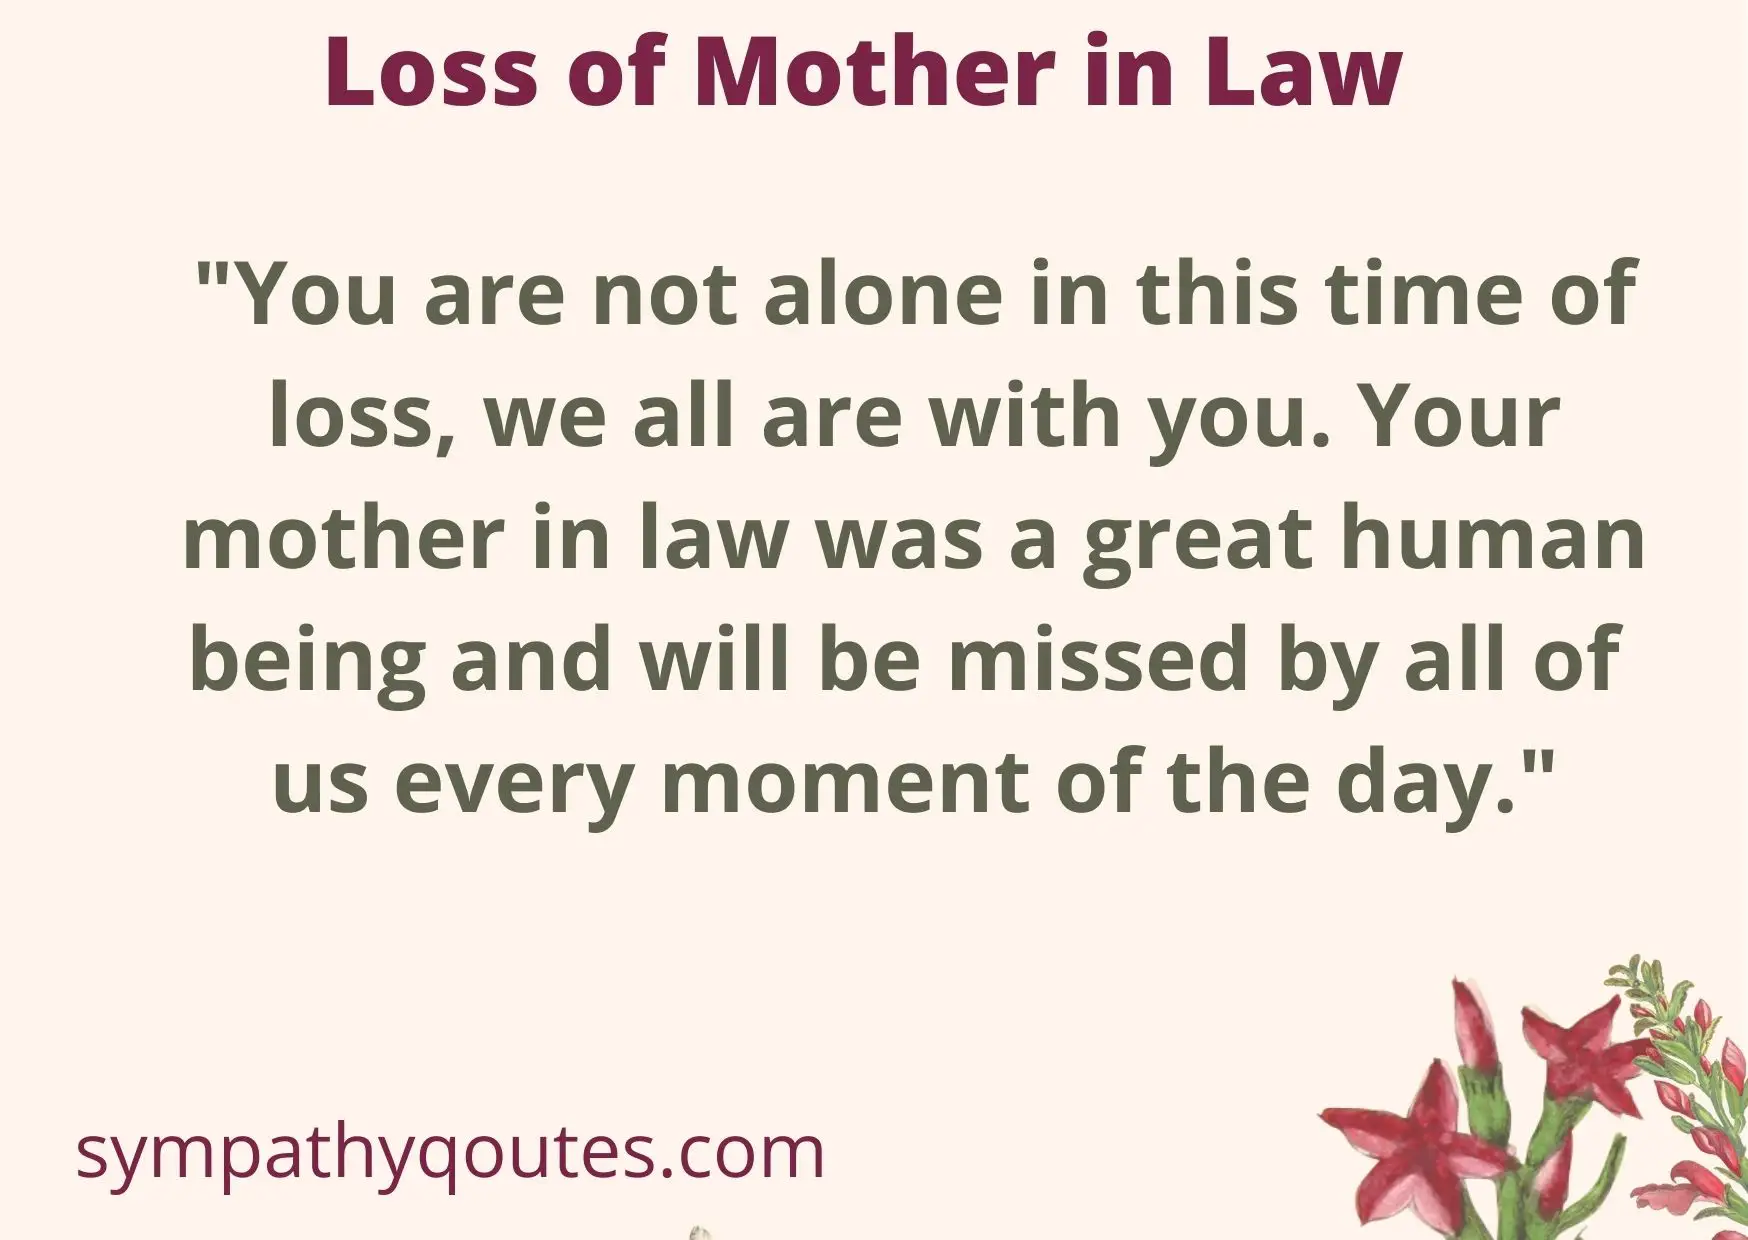 Condolence Messages for Loss of Mother in Law